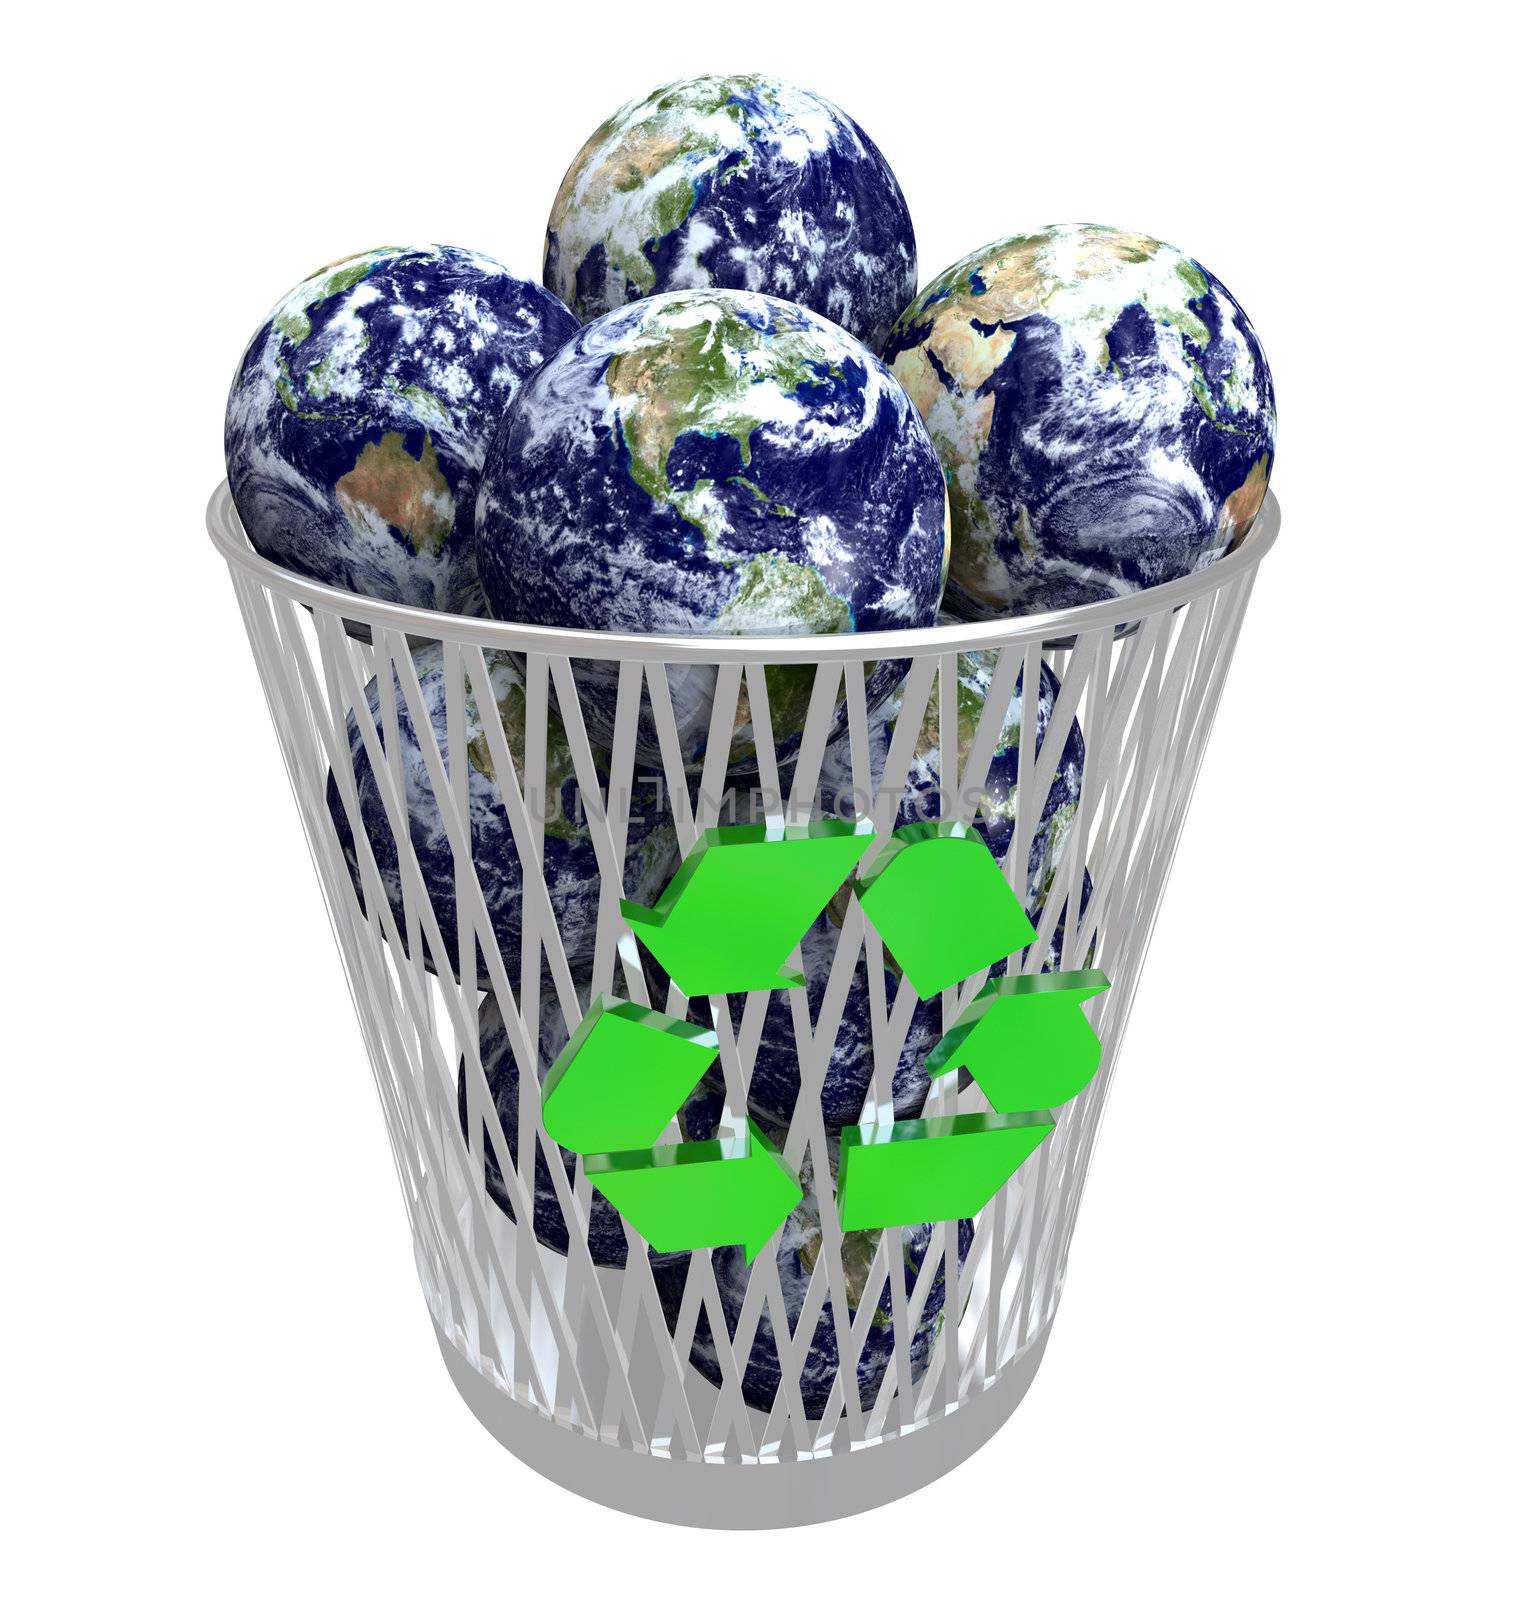 Many Earths in Recycling Basket by iQoncept